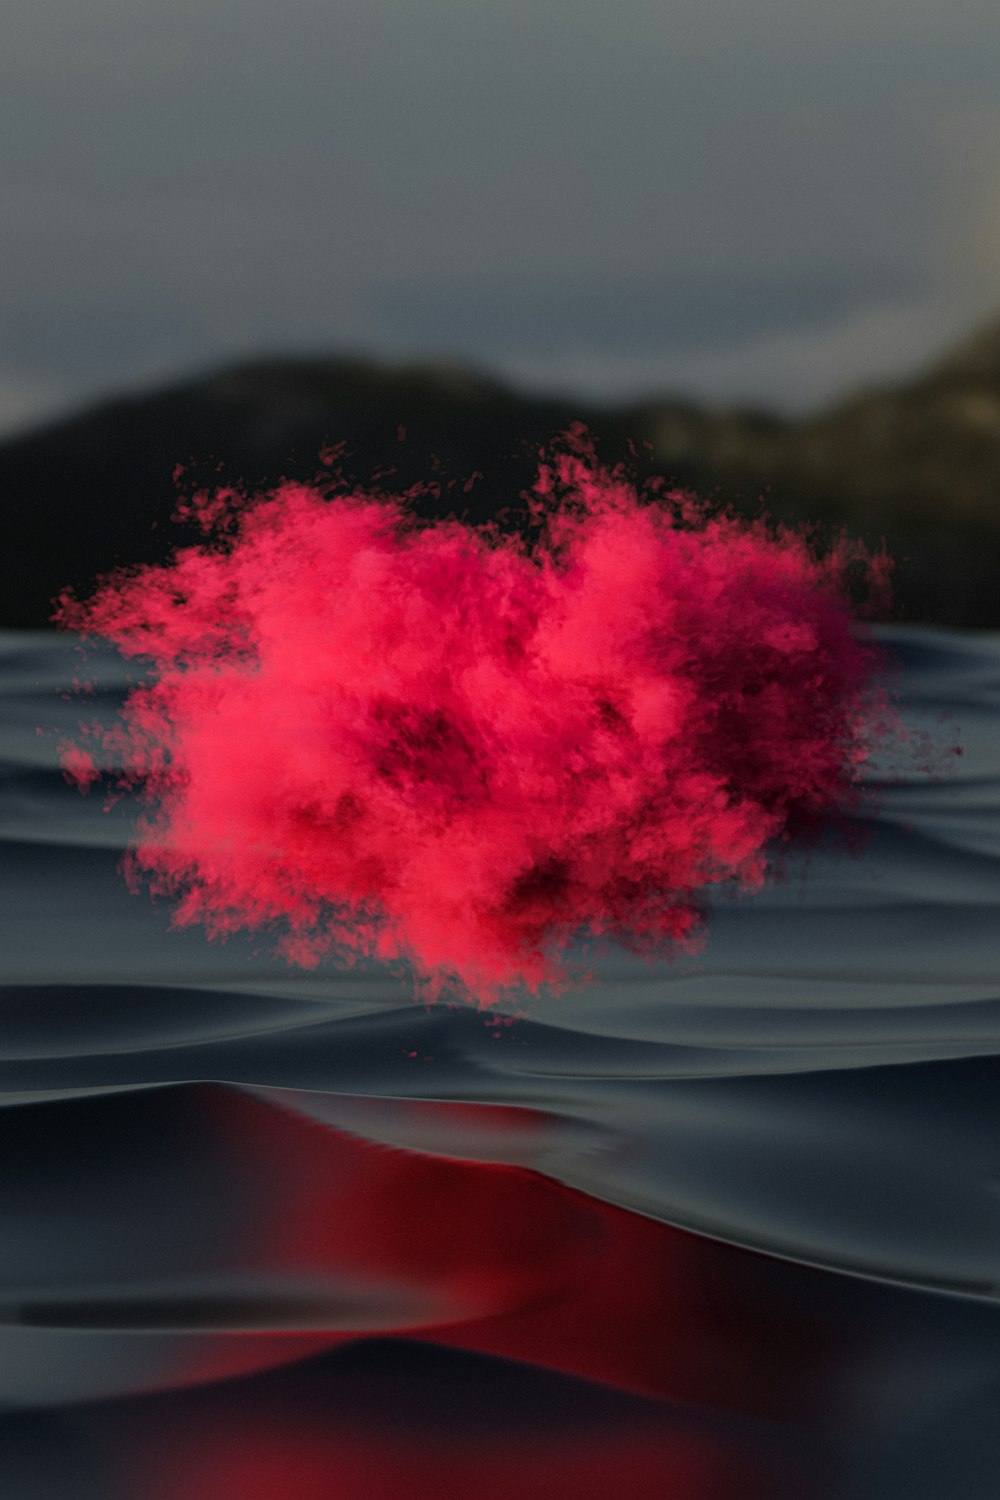 a pink substance is floating in the water